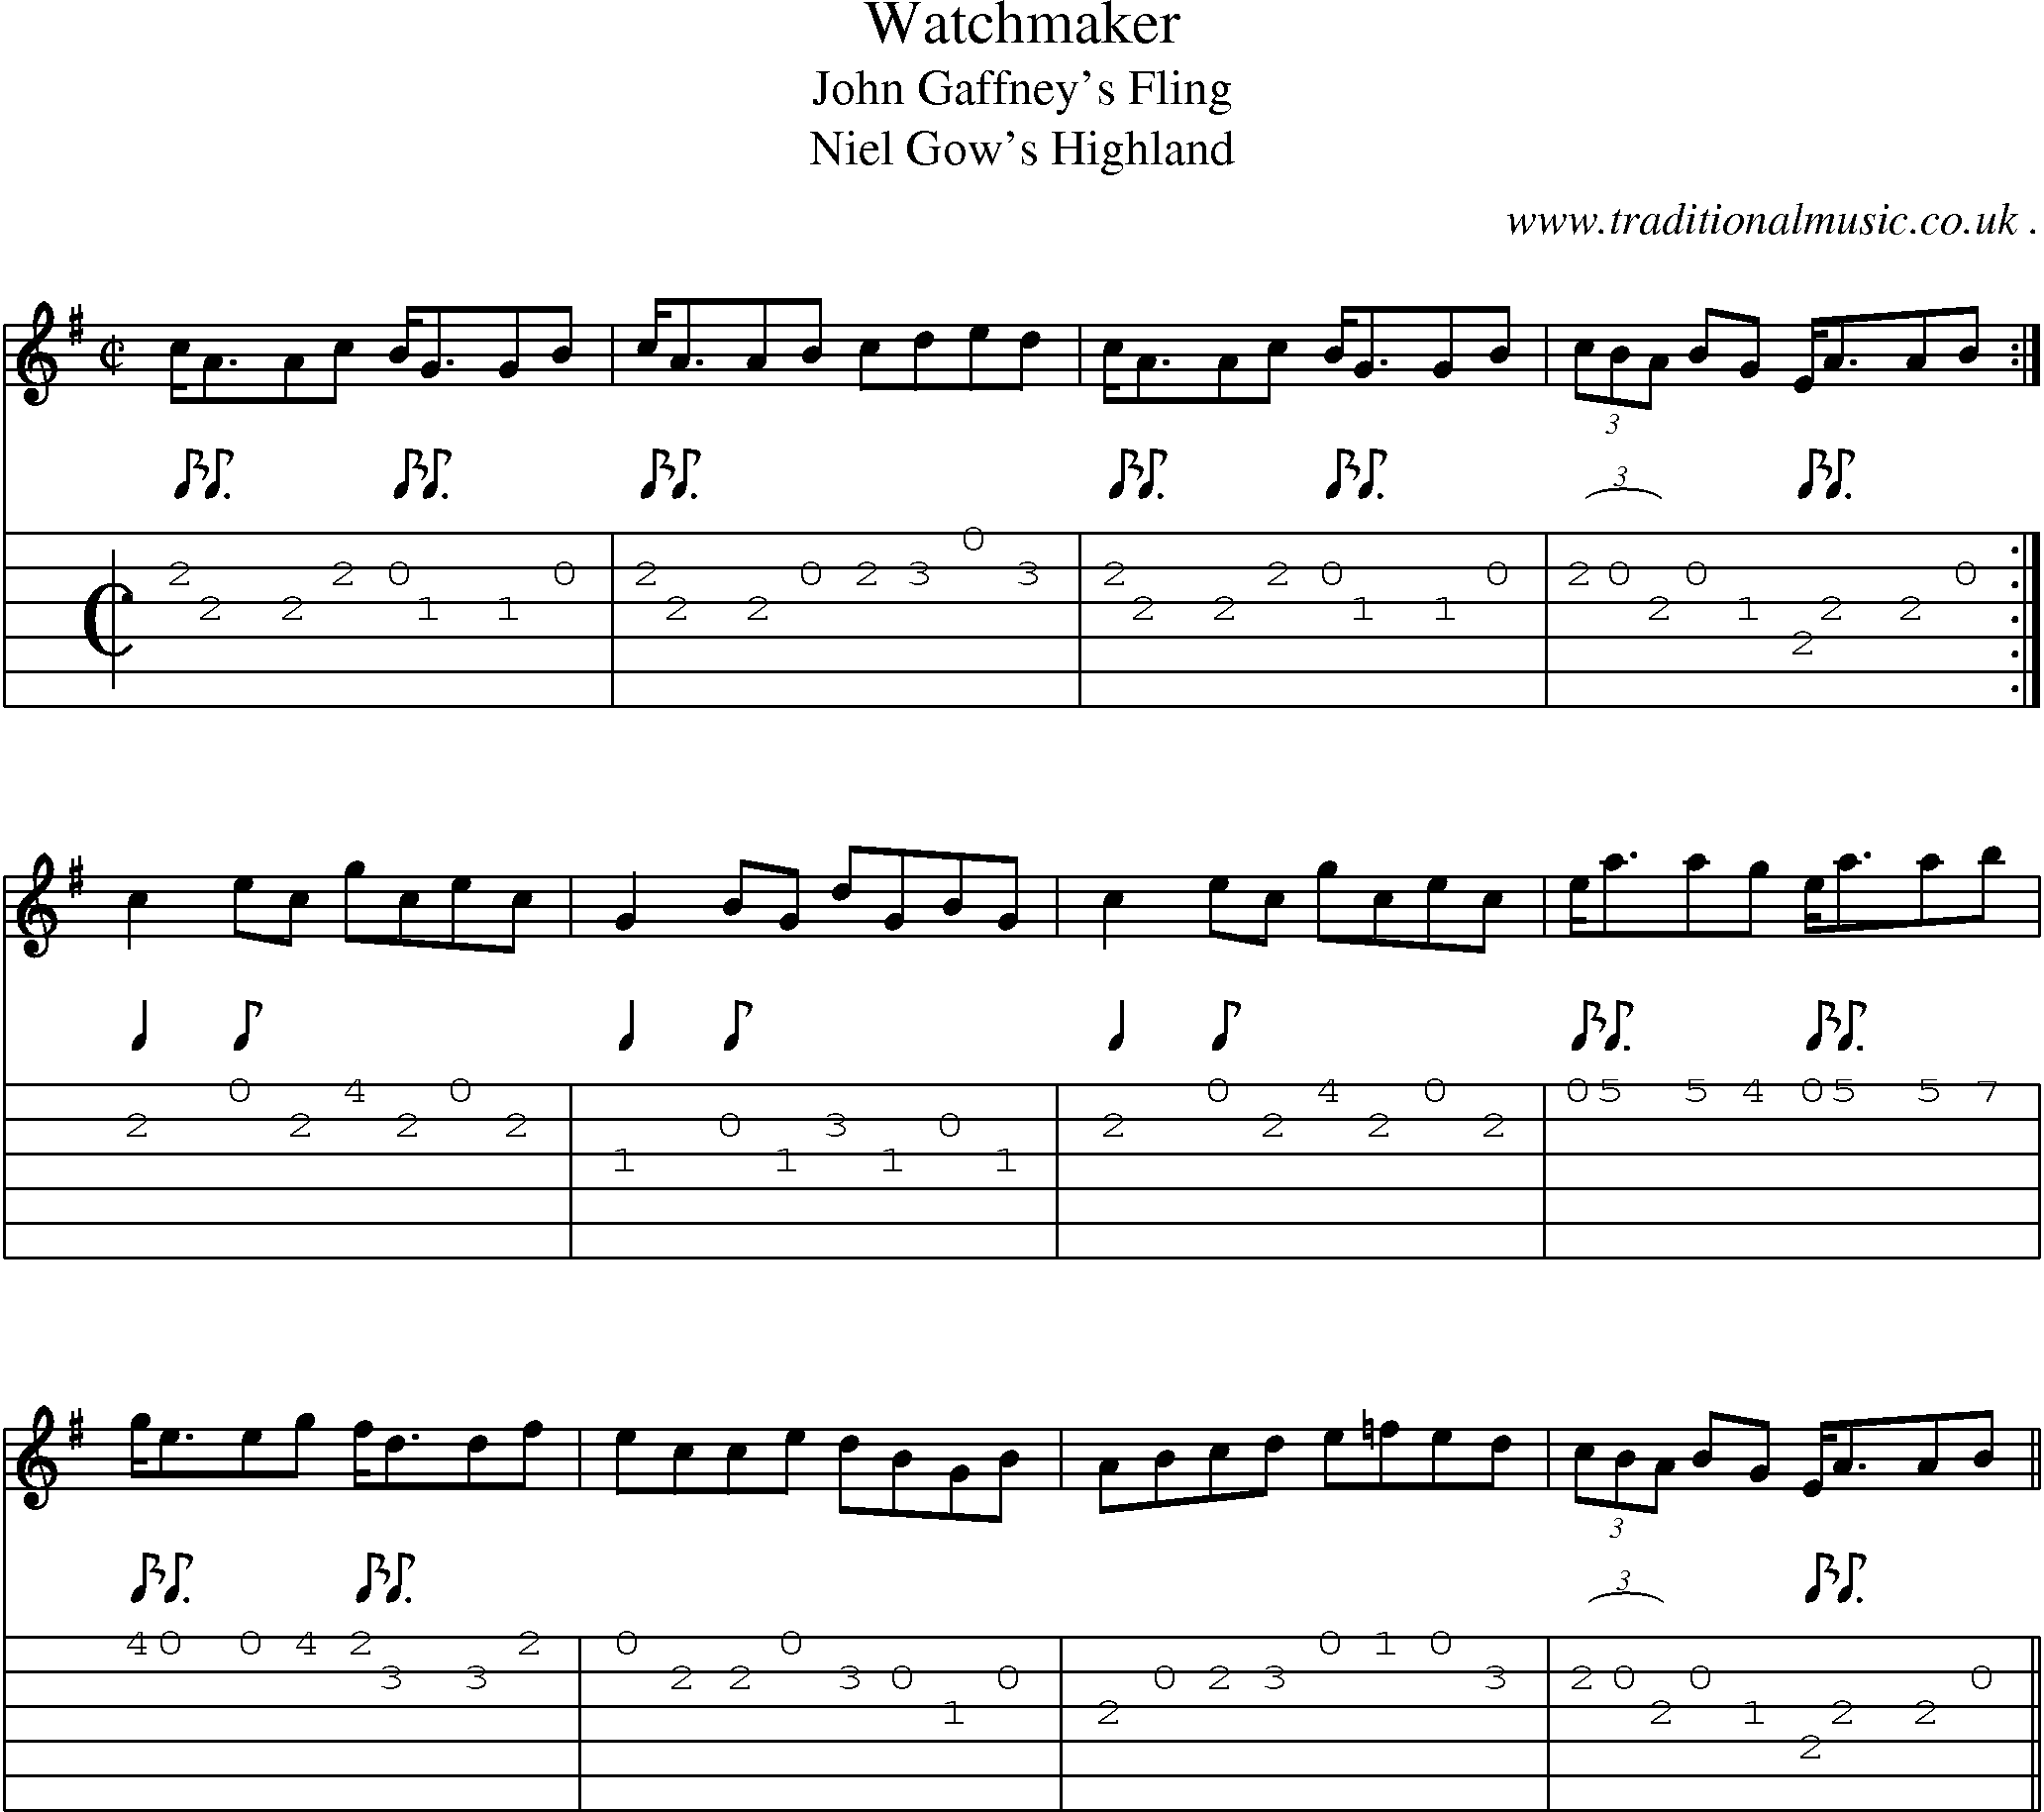 Sheet-Music and Guitar Tabs for Watchmaker